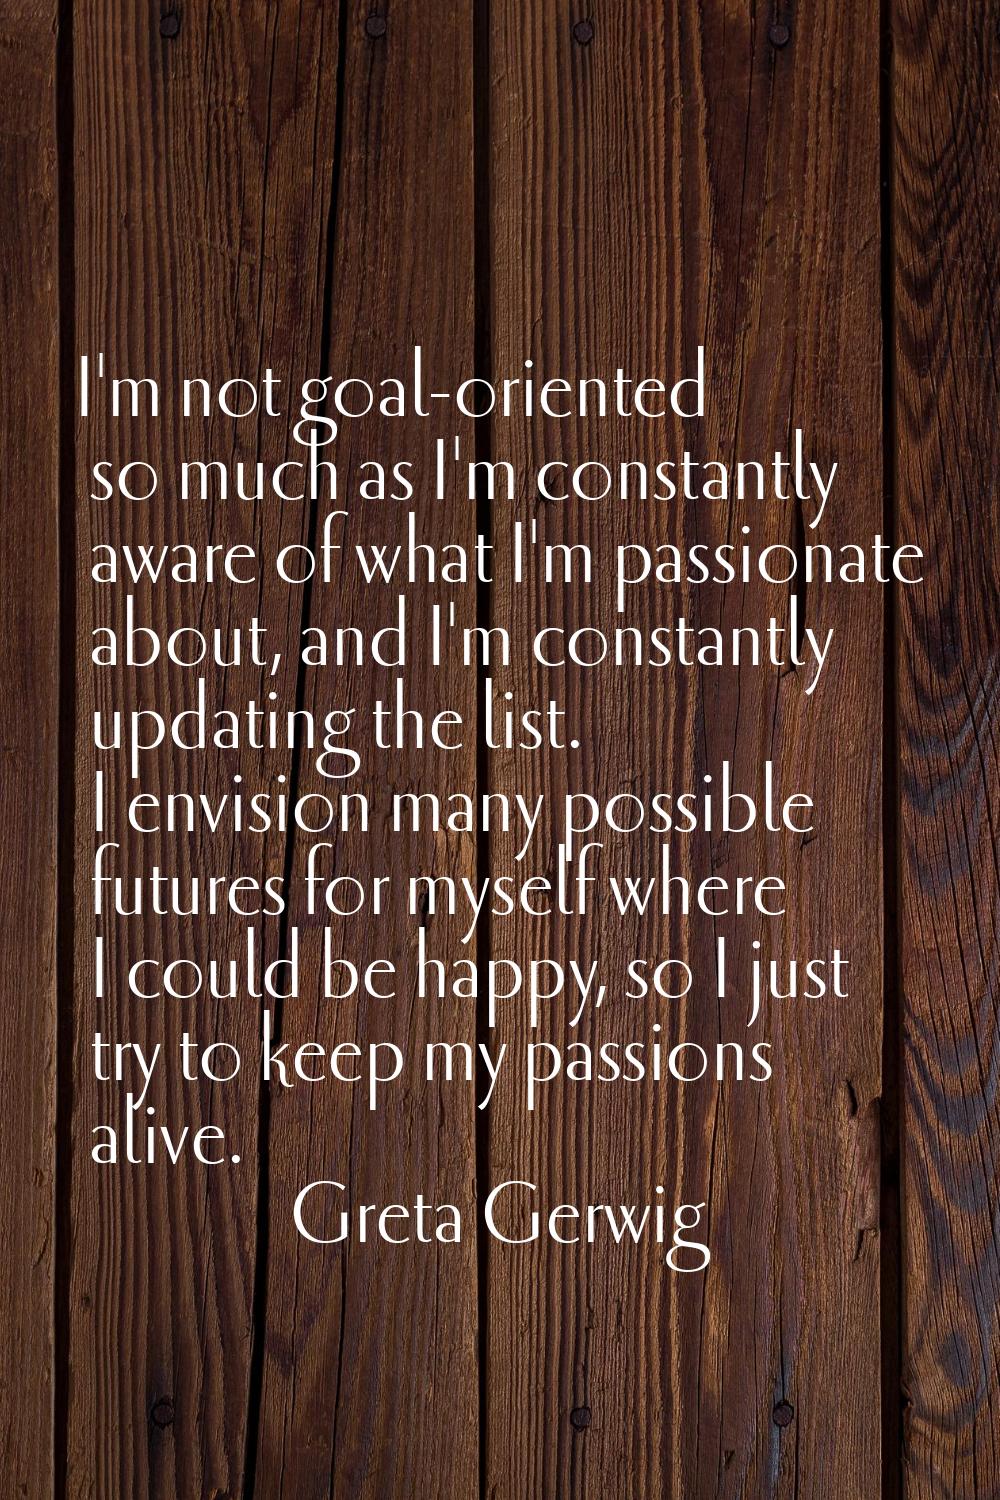 I'm not goal-oriented so much as I'm constantly aware of what I'm passionate about, and I'm constan